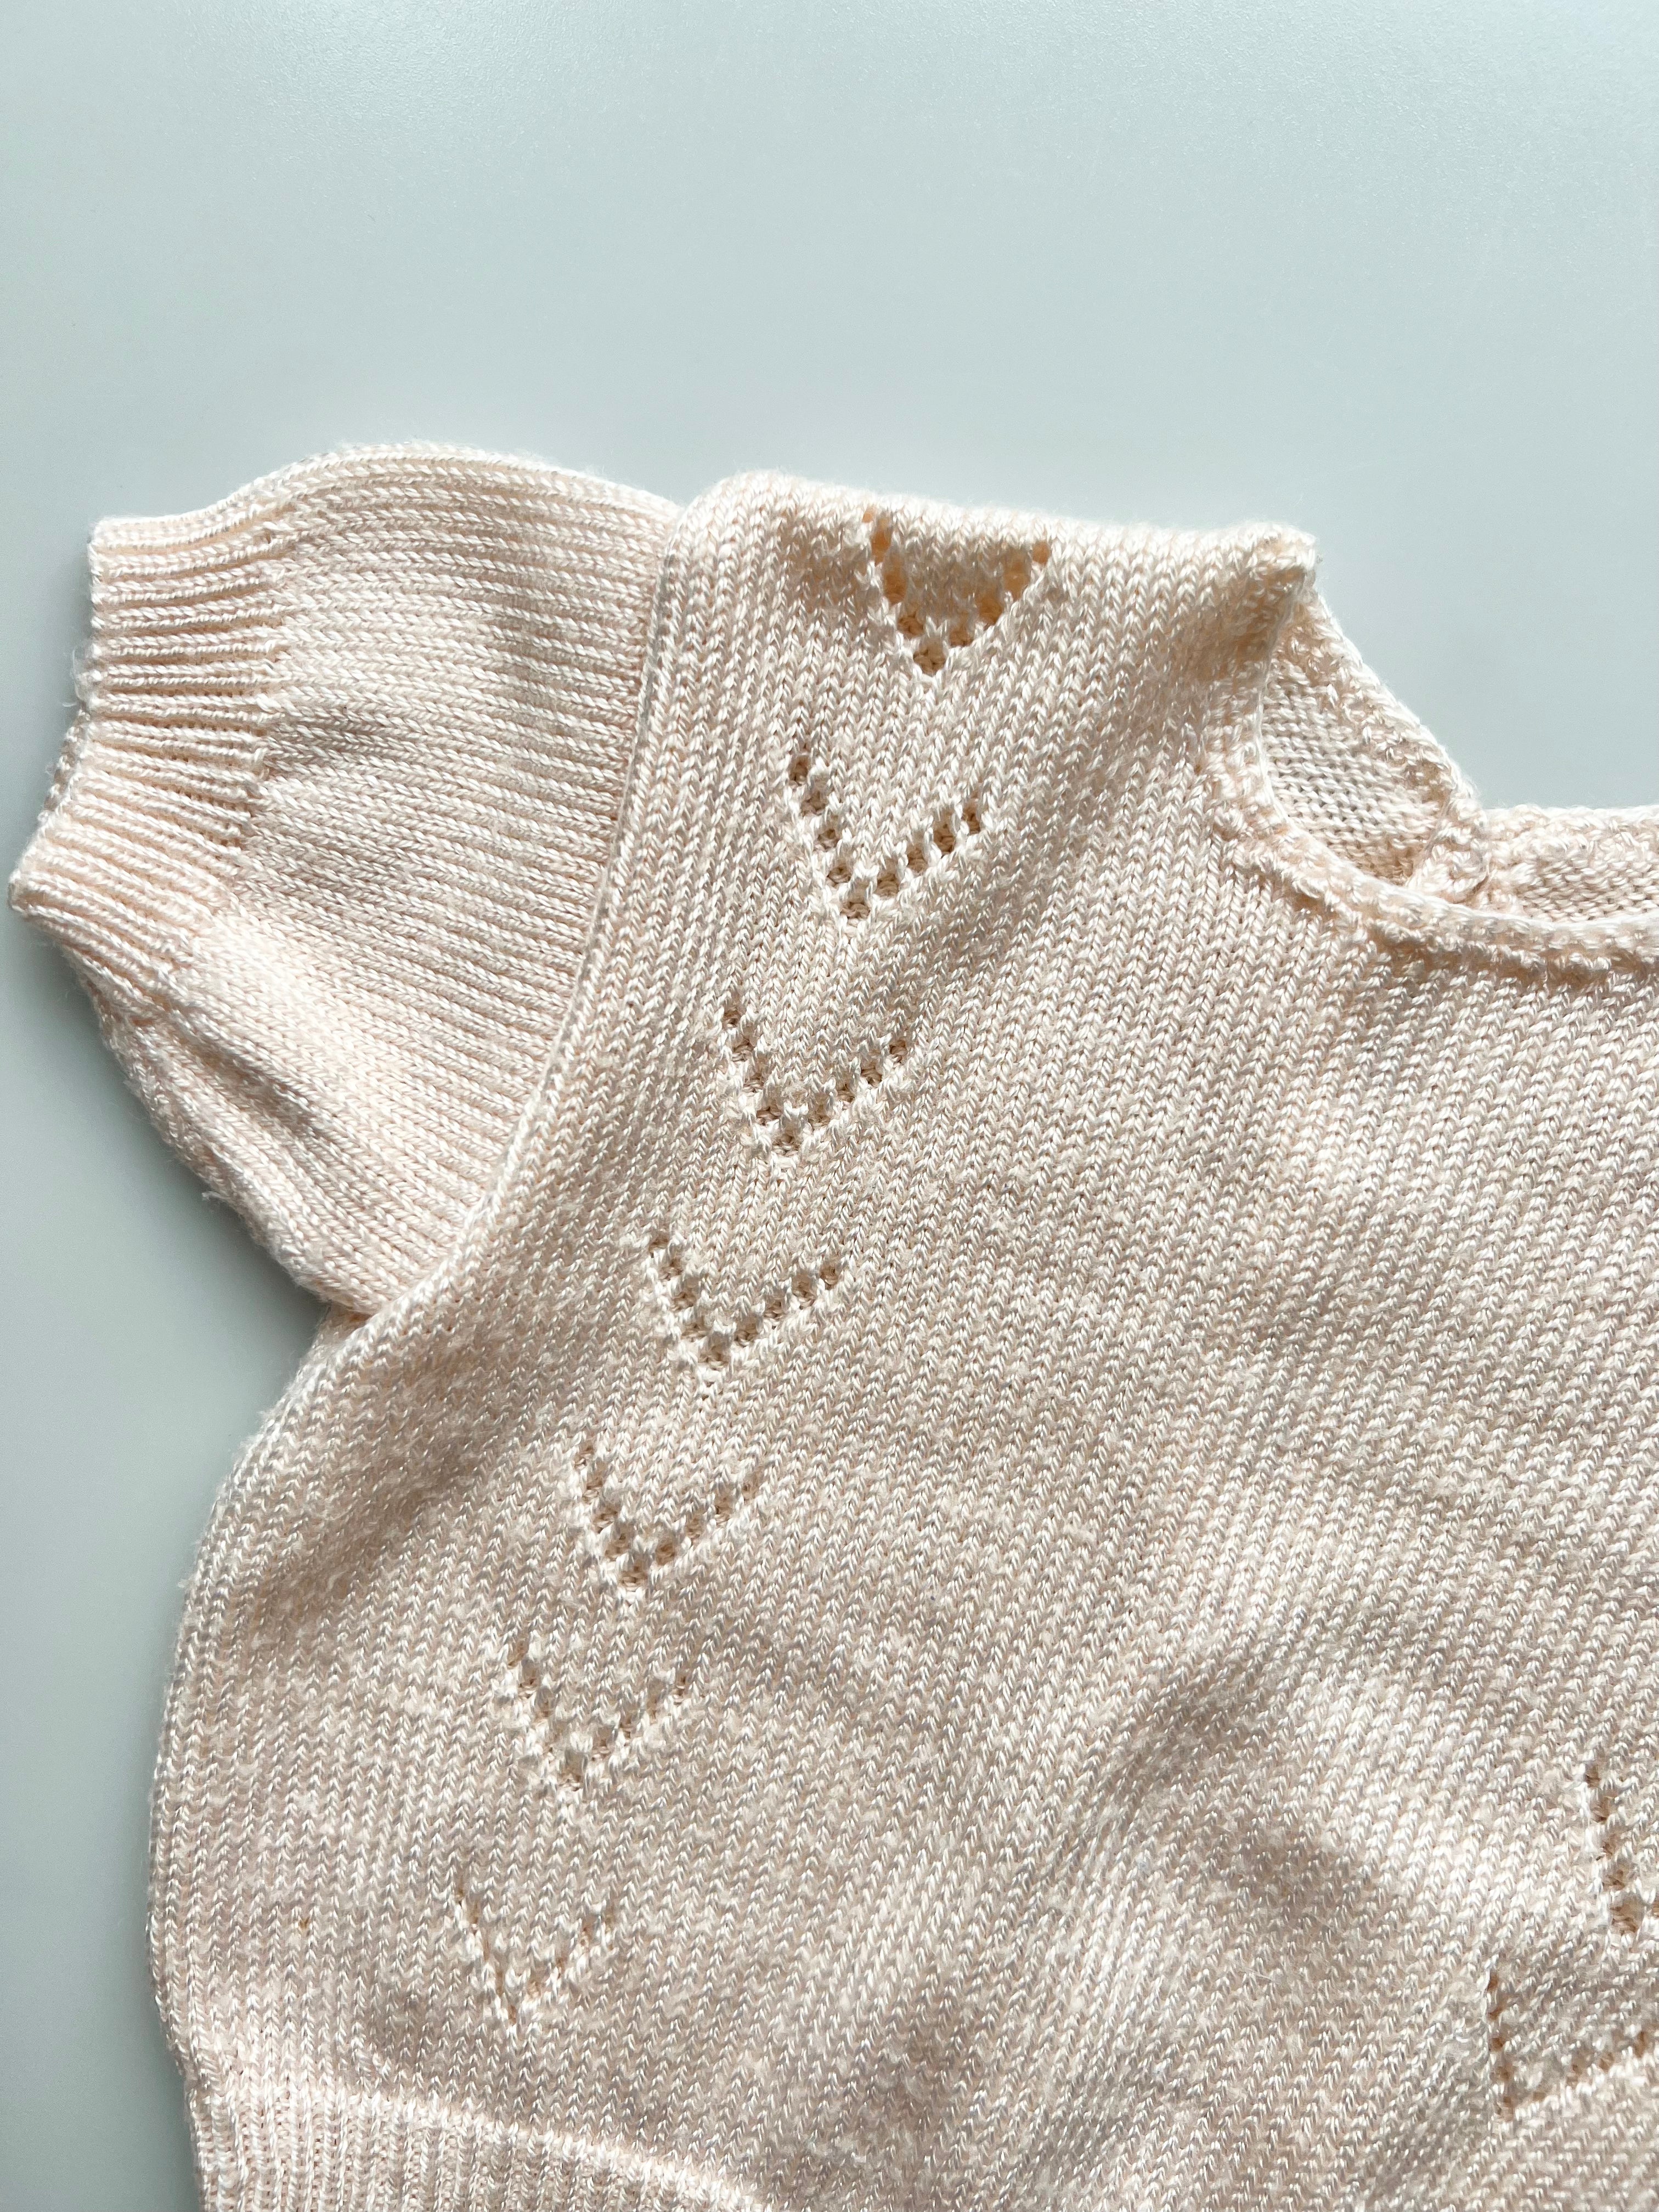 Vintage Blush Knitted Top 9-18 Months